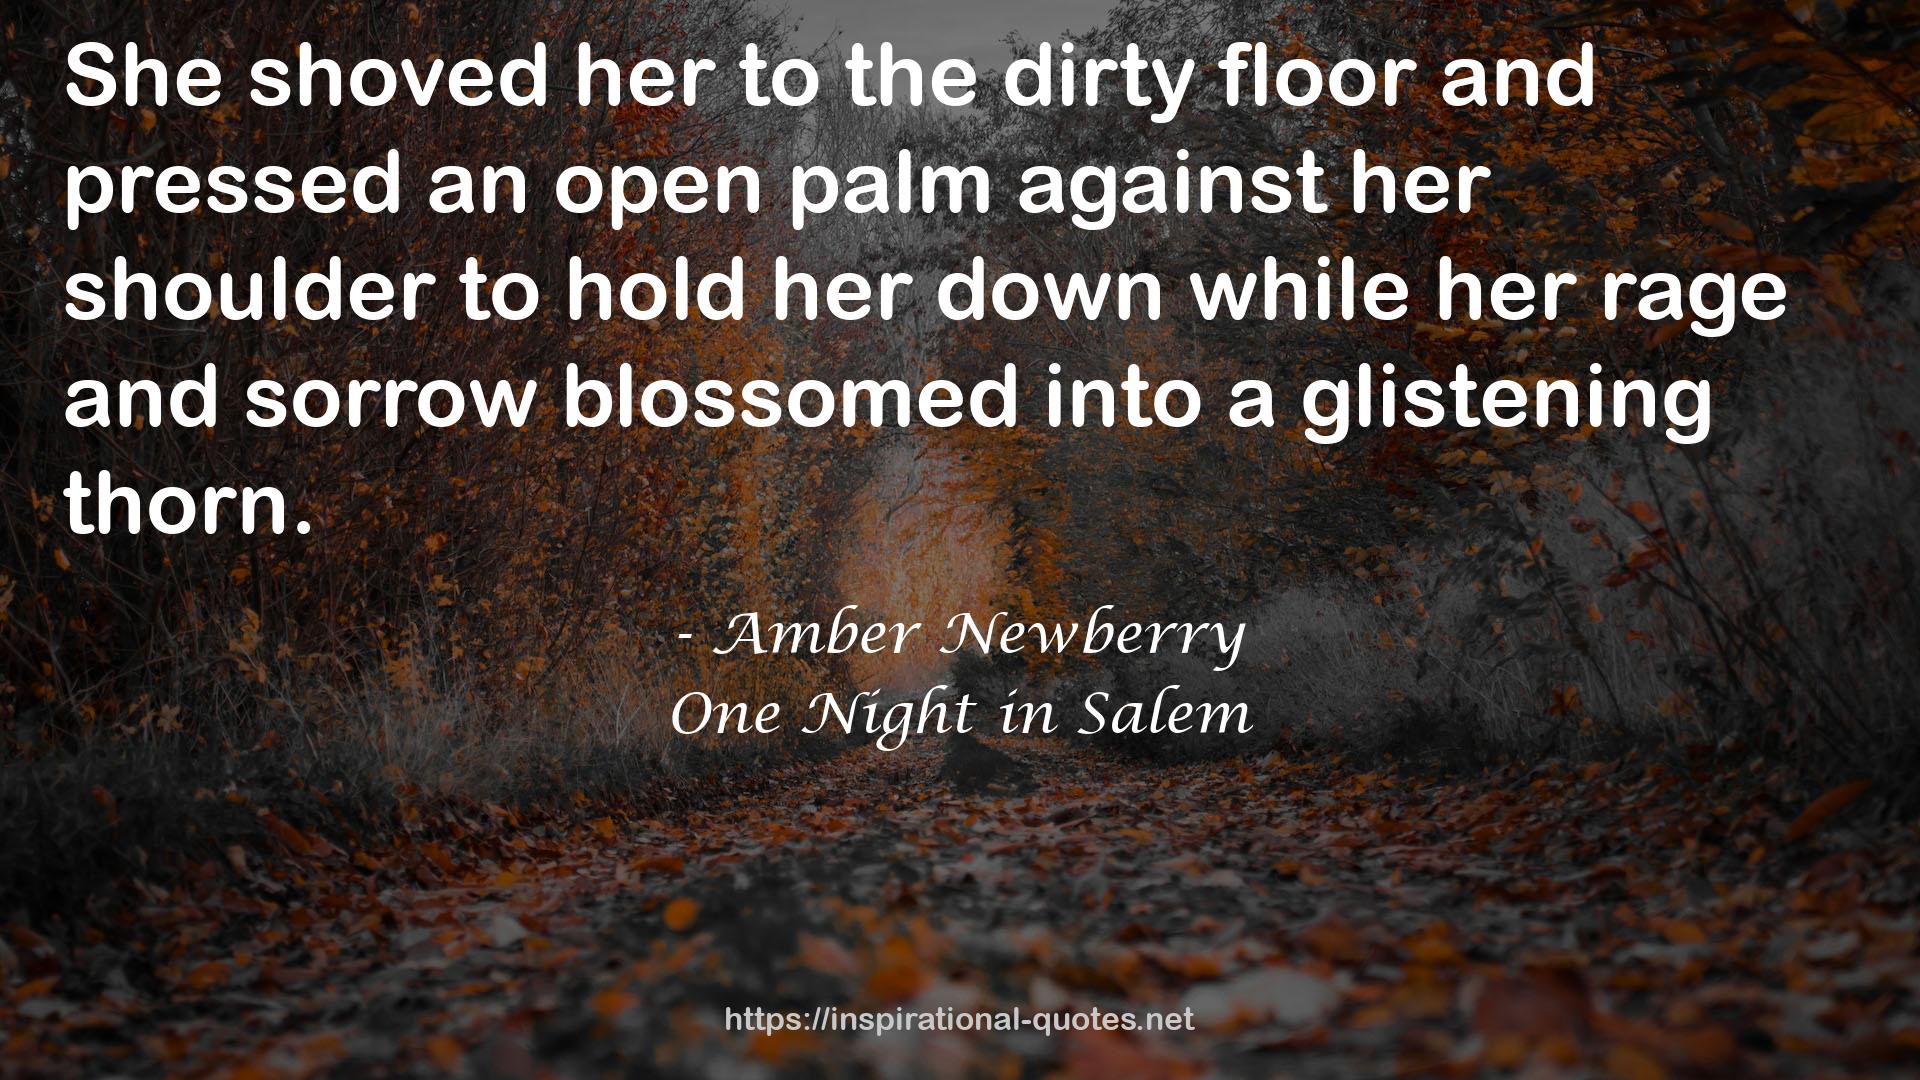 One Night in Salem QUOTES